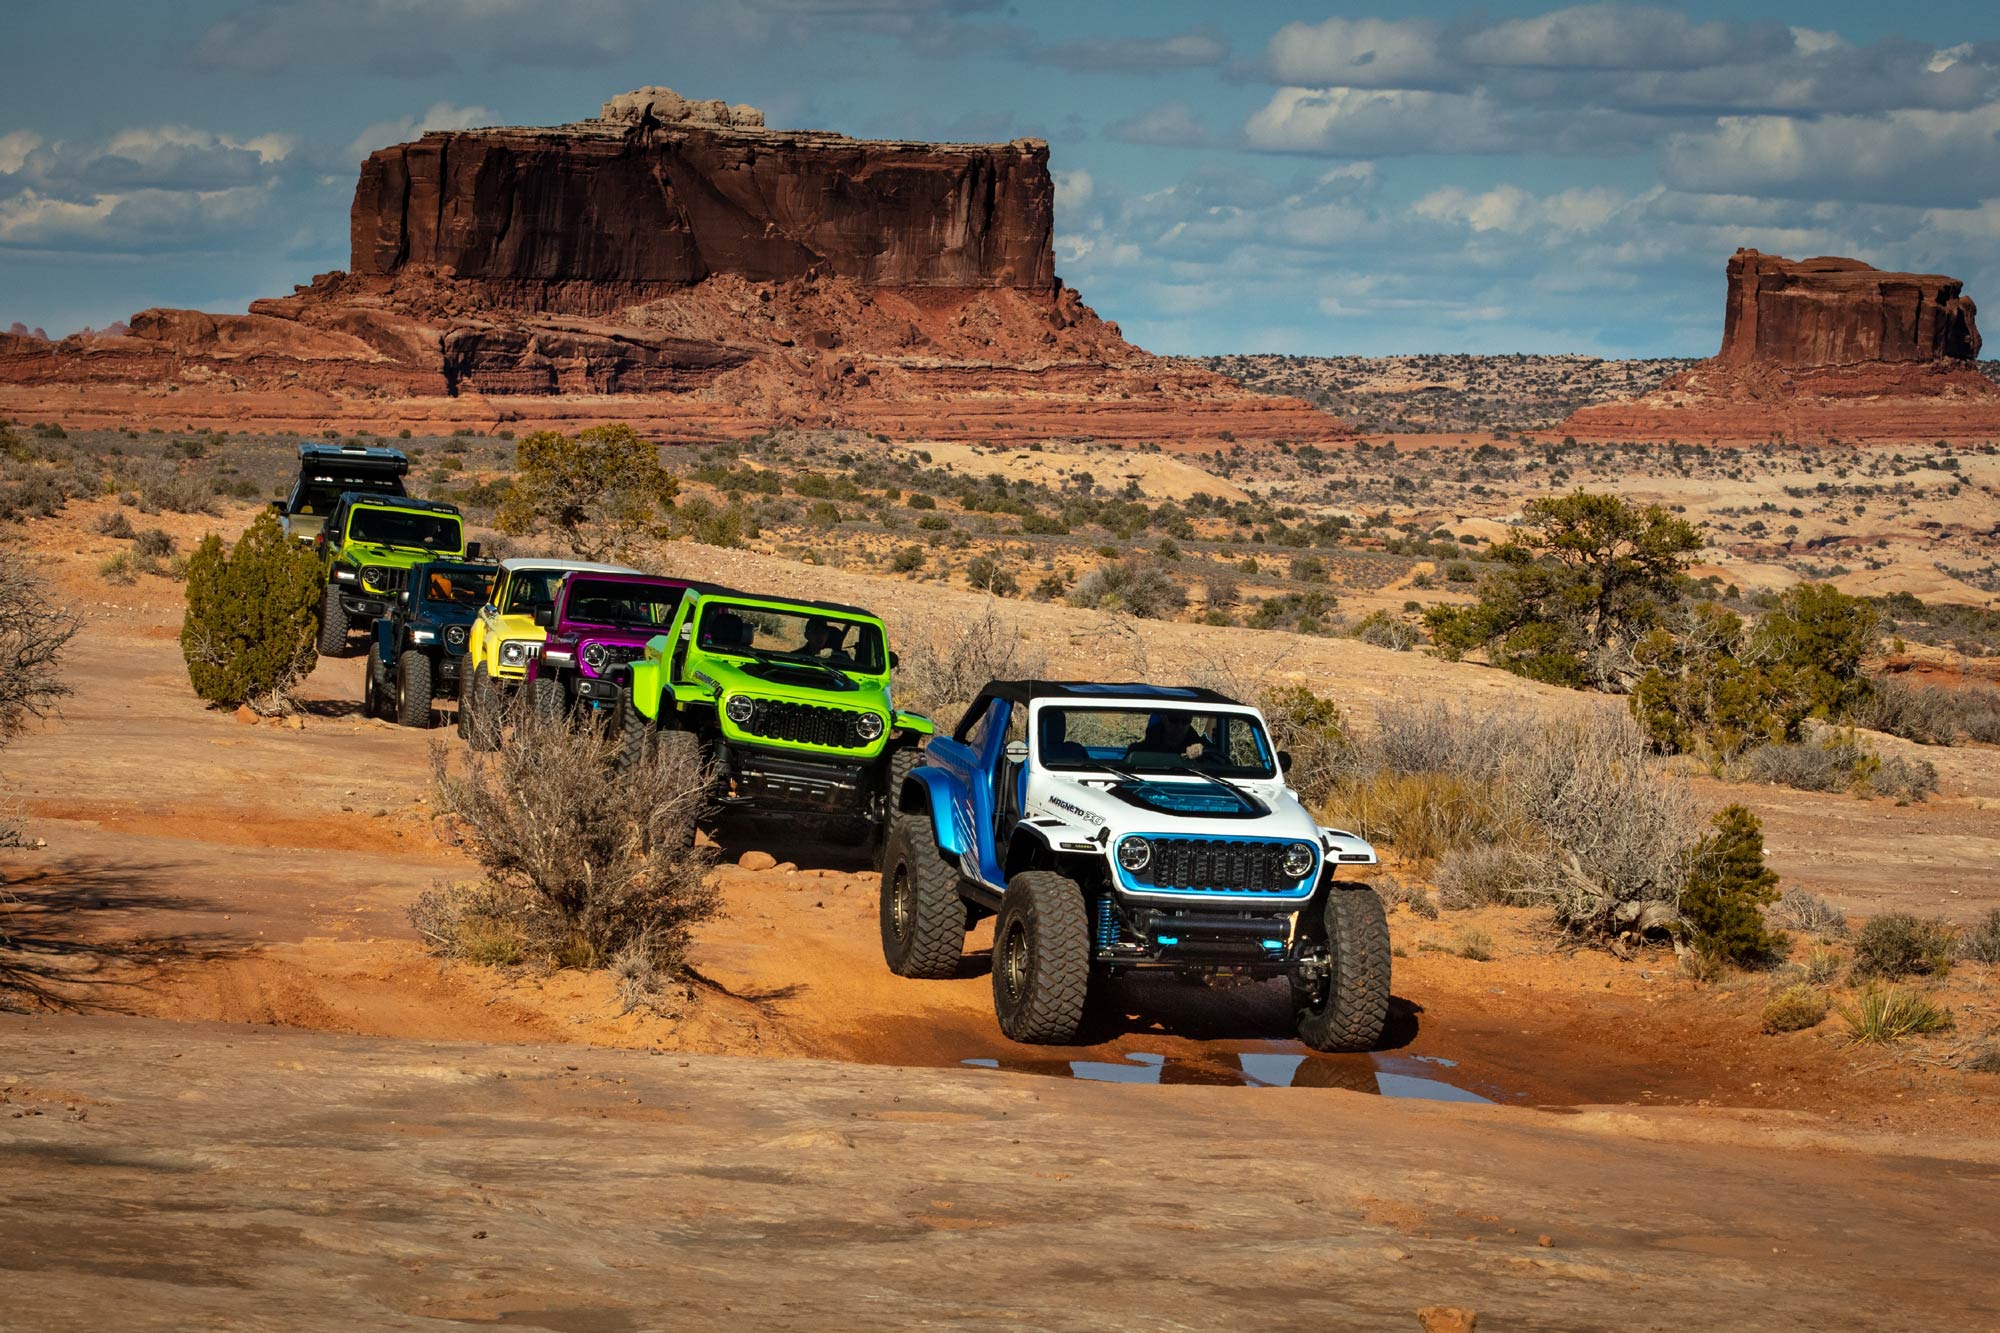 Several Jeeps traverse the wilderness near Moab